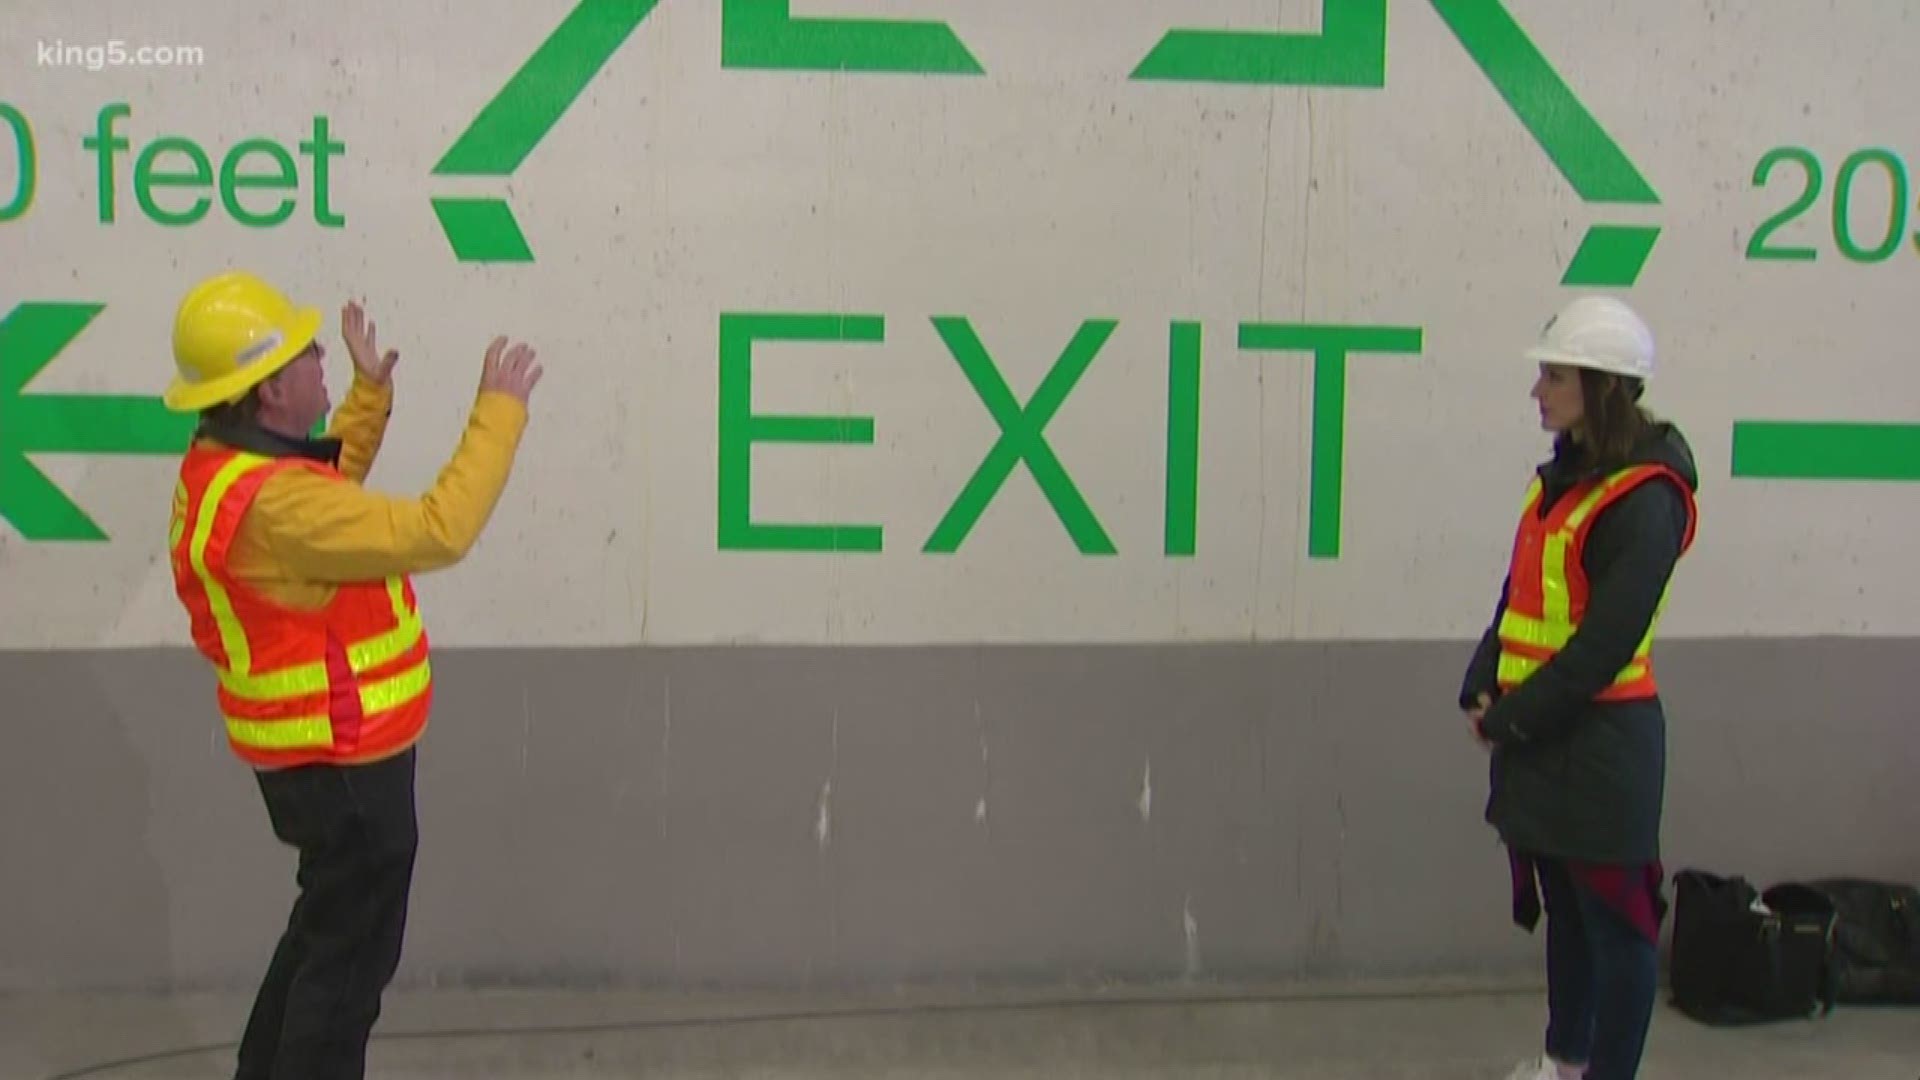 KING 5's Kaci Aitchison is with our own Seattle tunnel expert, Glenn Farley, discussing ways to exit in case of emergencies.